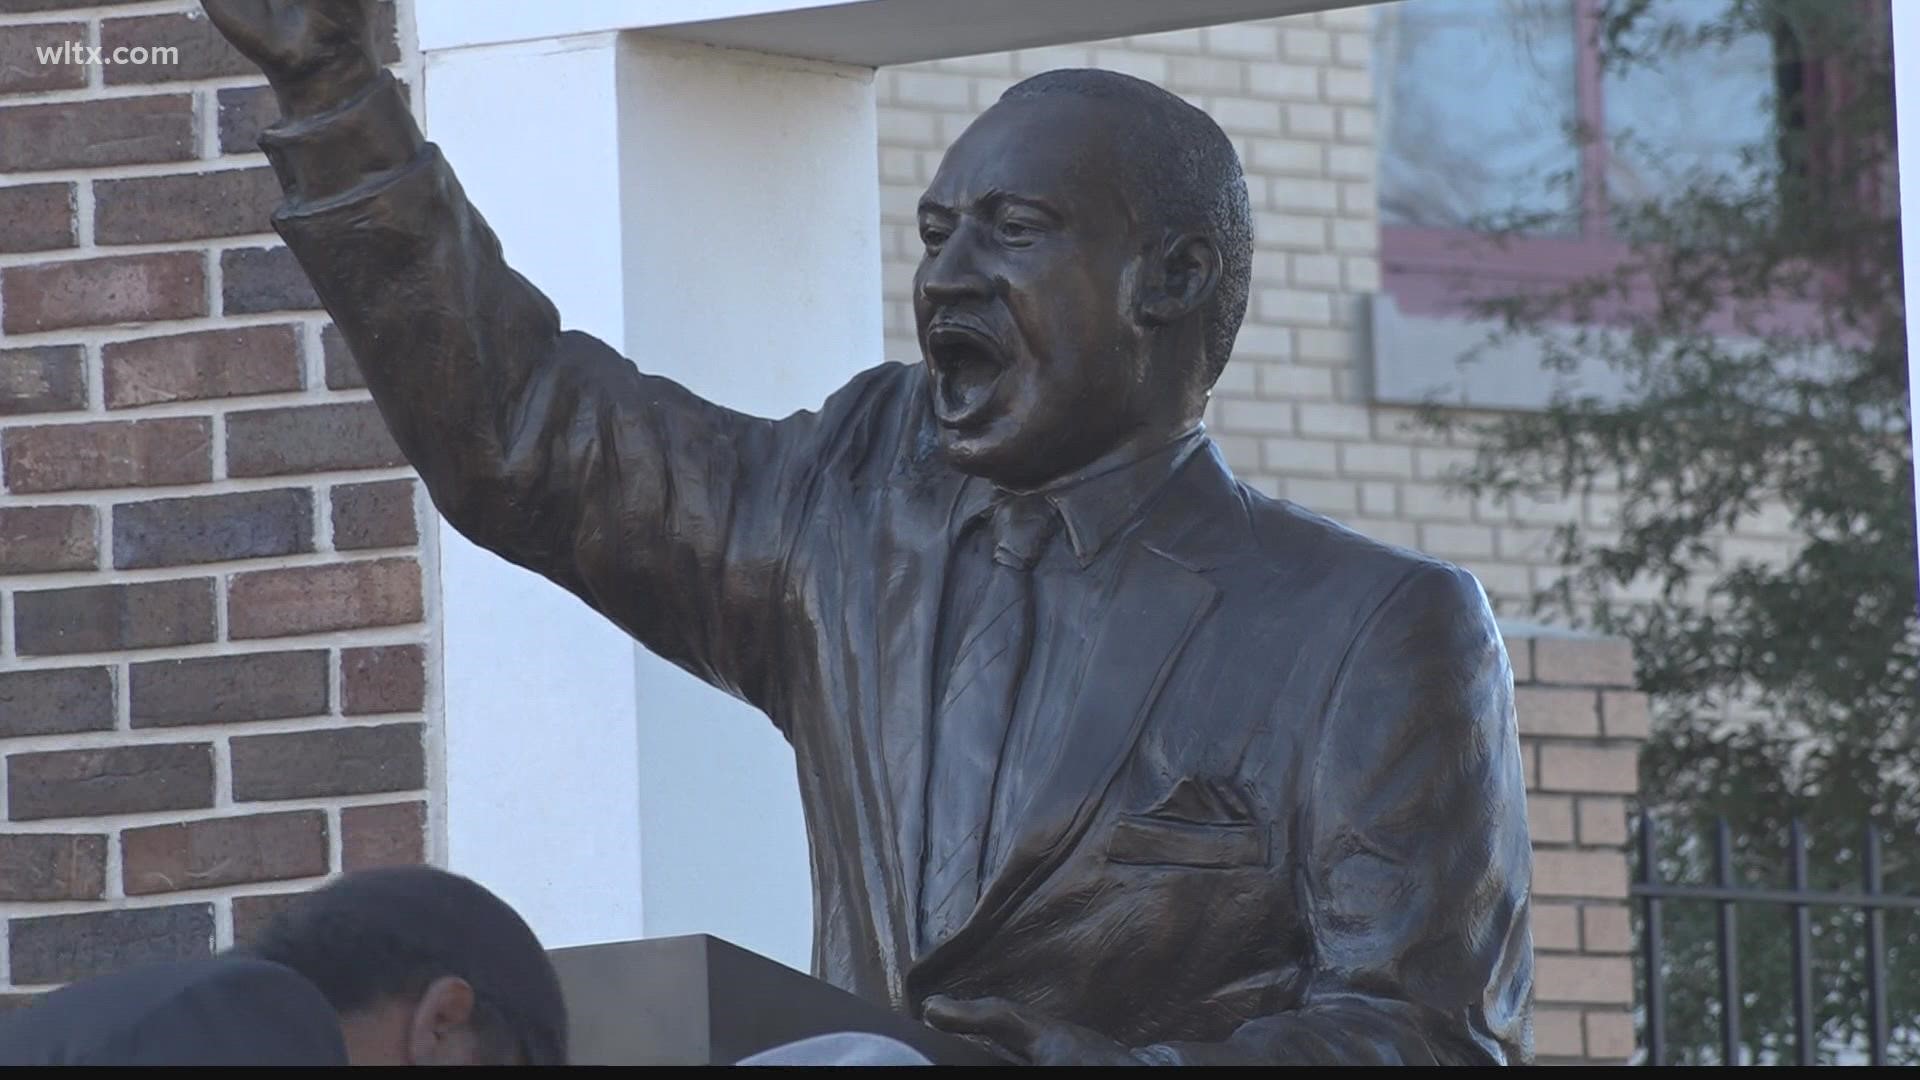 Civil rights leader Dr. Martin Luther King, Jr., was commemorated Monday with a series of events throughout the United States and here in the Midlands.